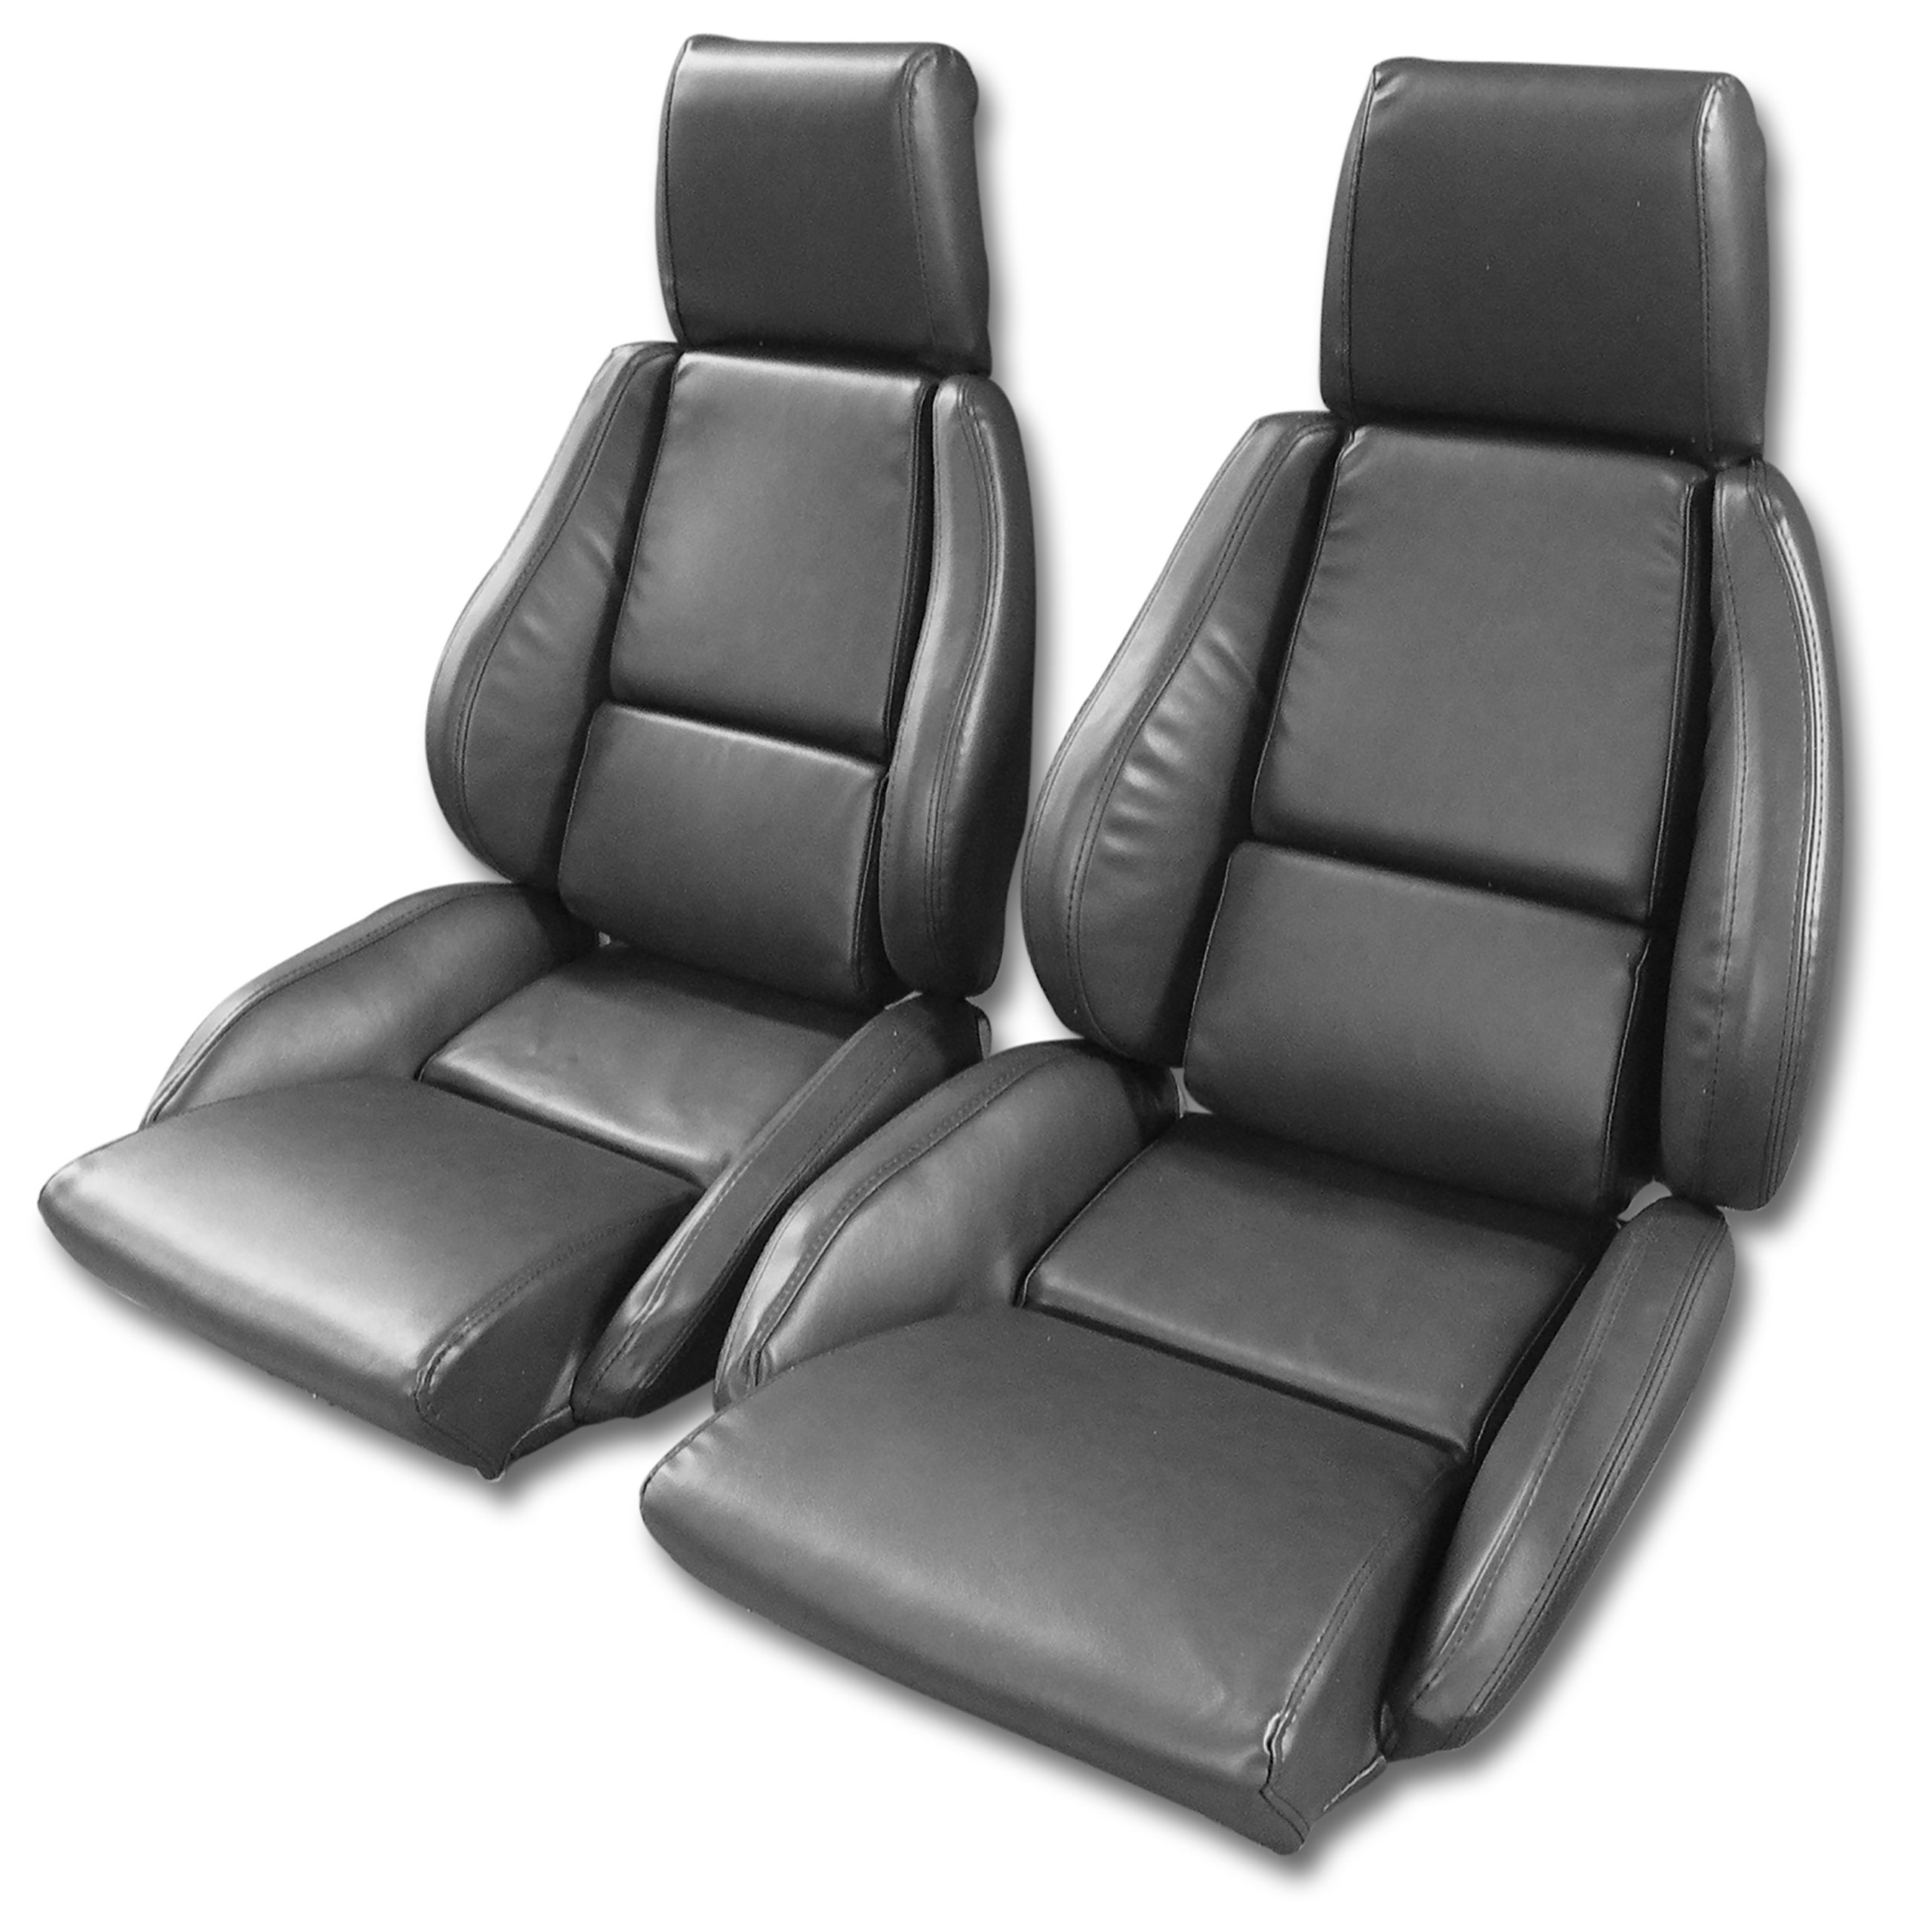 84-87 Corvette C4 468669 OE Style 100% Leather Sport Seat Covers W/O Perforated Inserts Gray CA-468822 